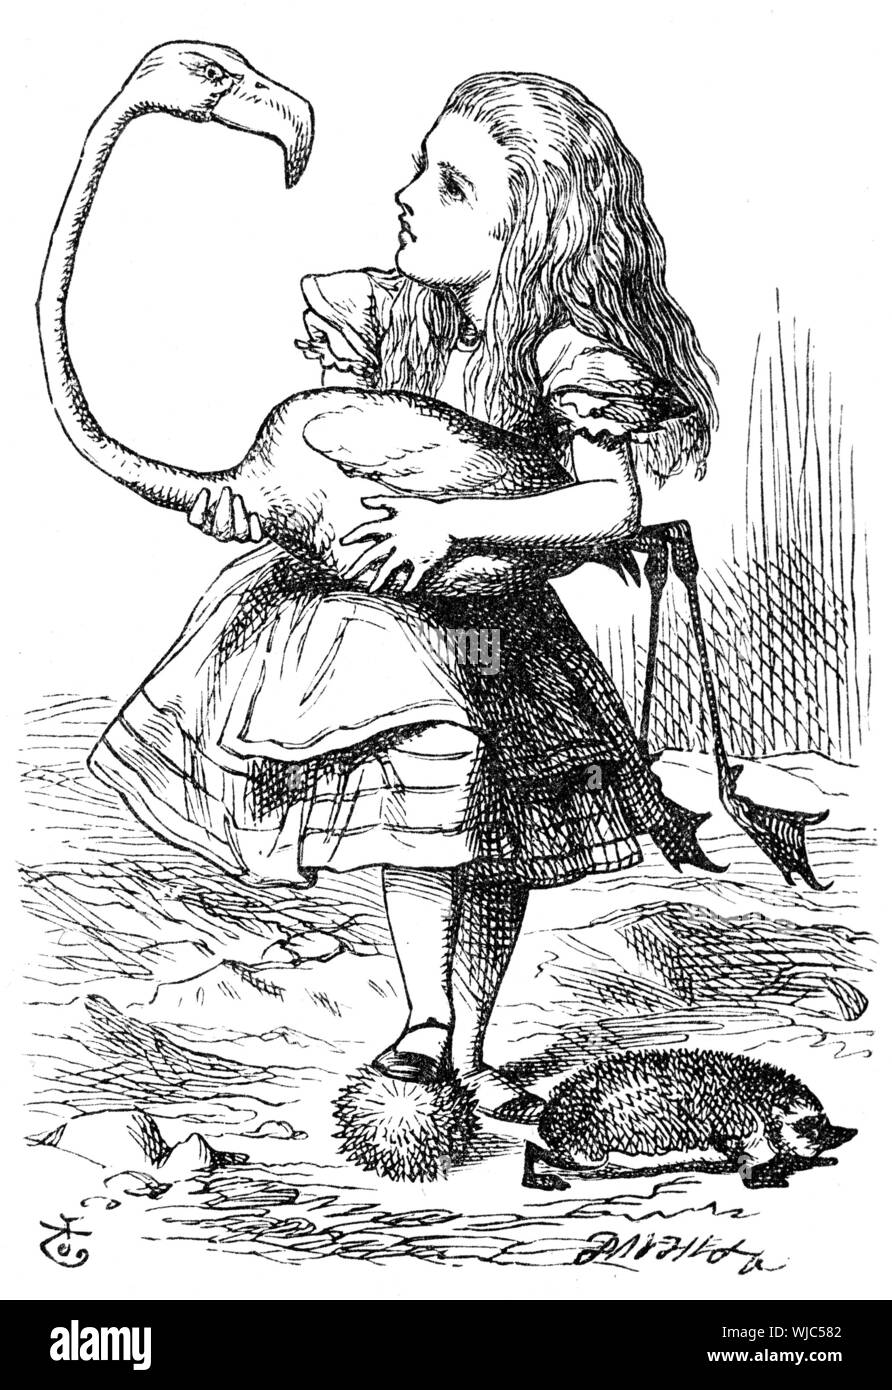 ALICE'S ADVENTURES IN WONDERLAND John Tenniel's 1865 illustration of Alice playing croquet with a flamingo Stock Photo